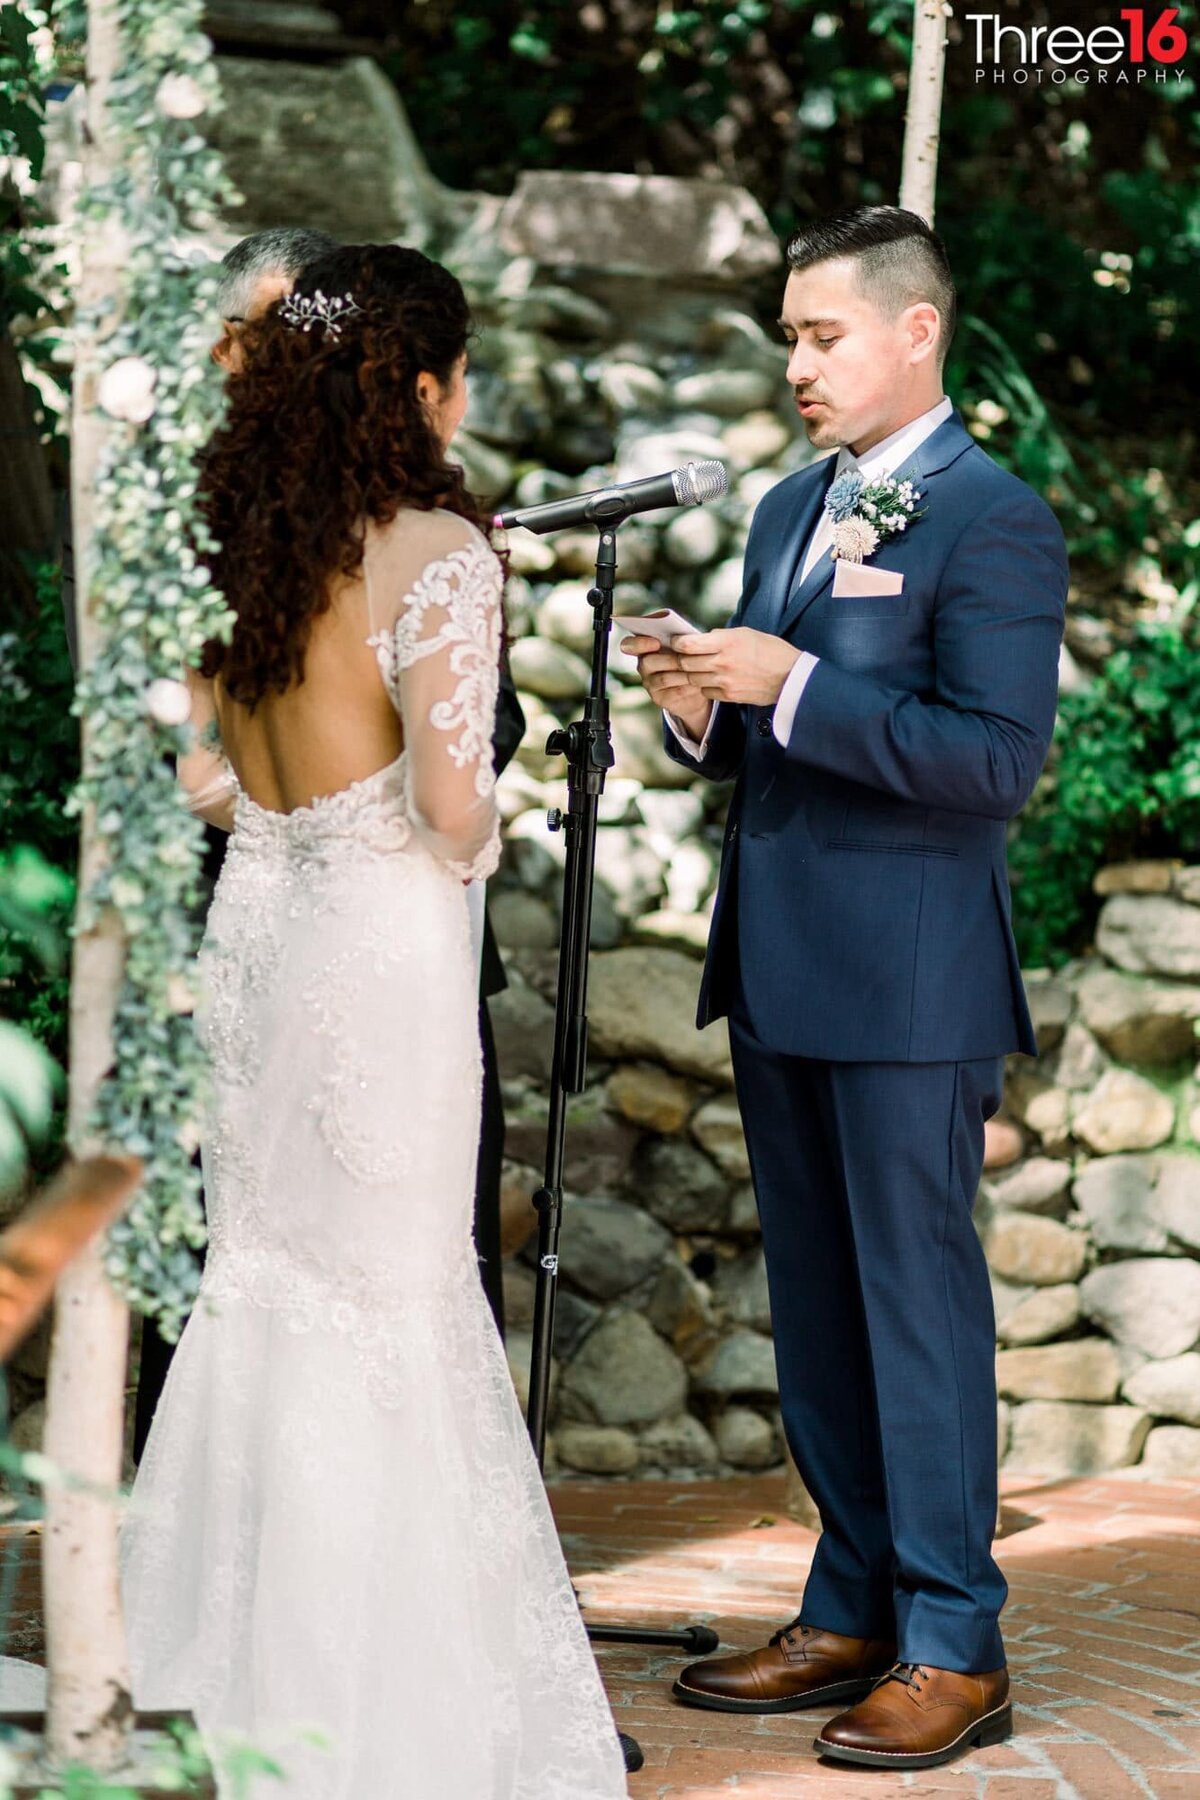 Groom stands at the altar reading his vows into a microphone to his Bride